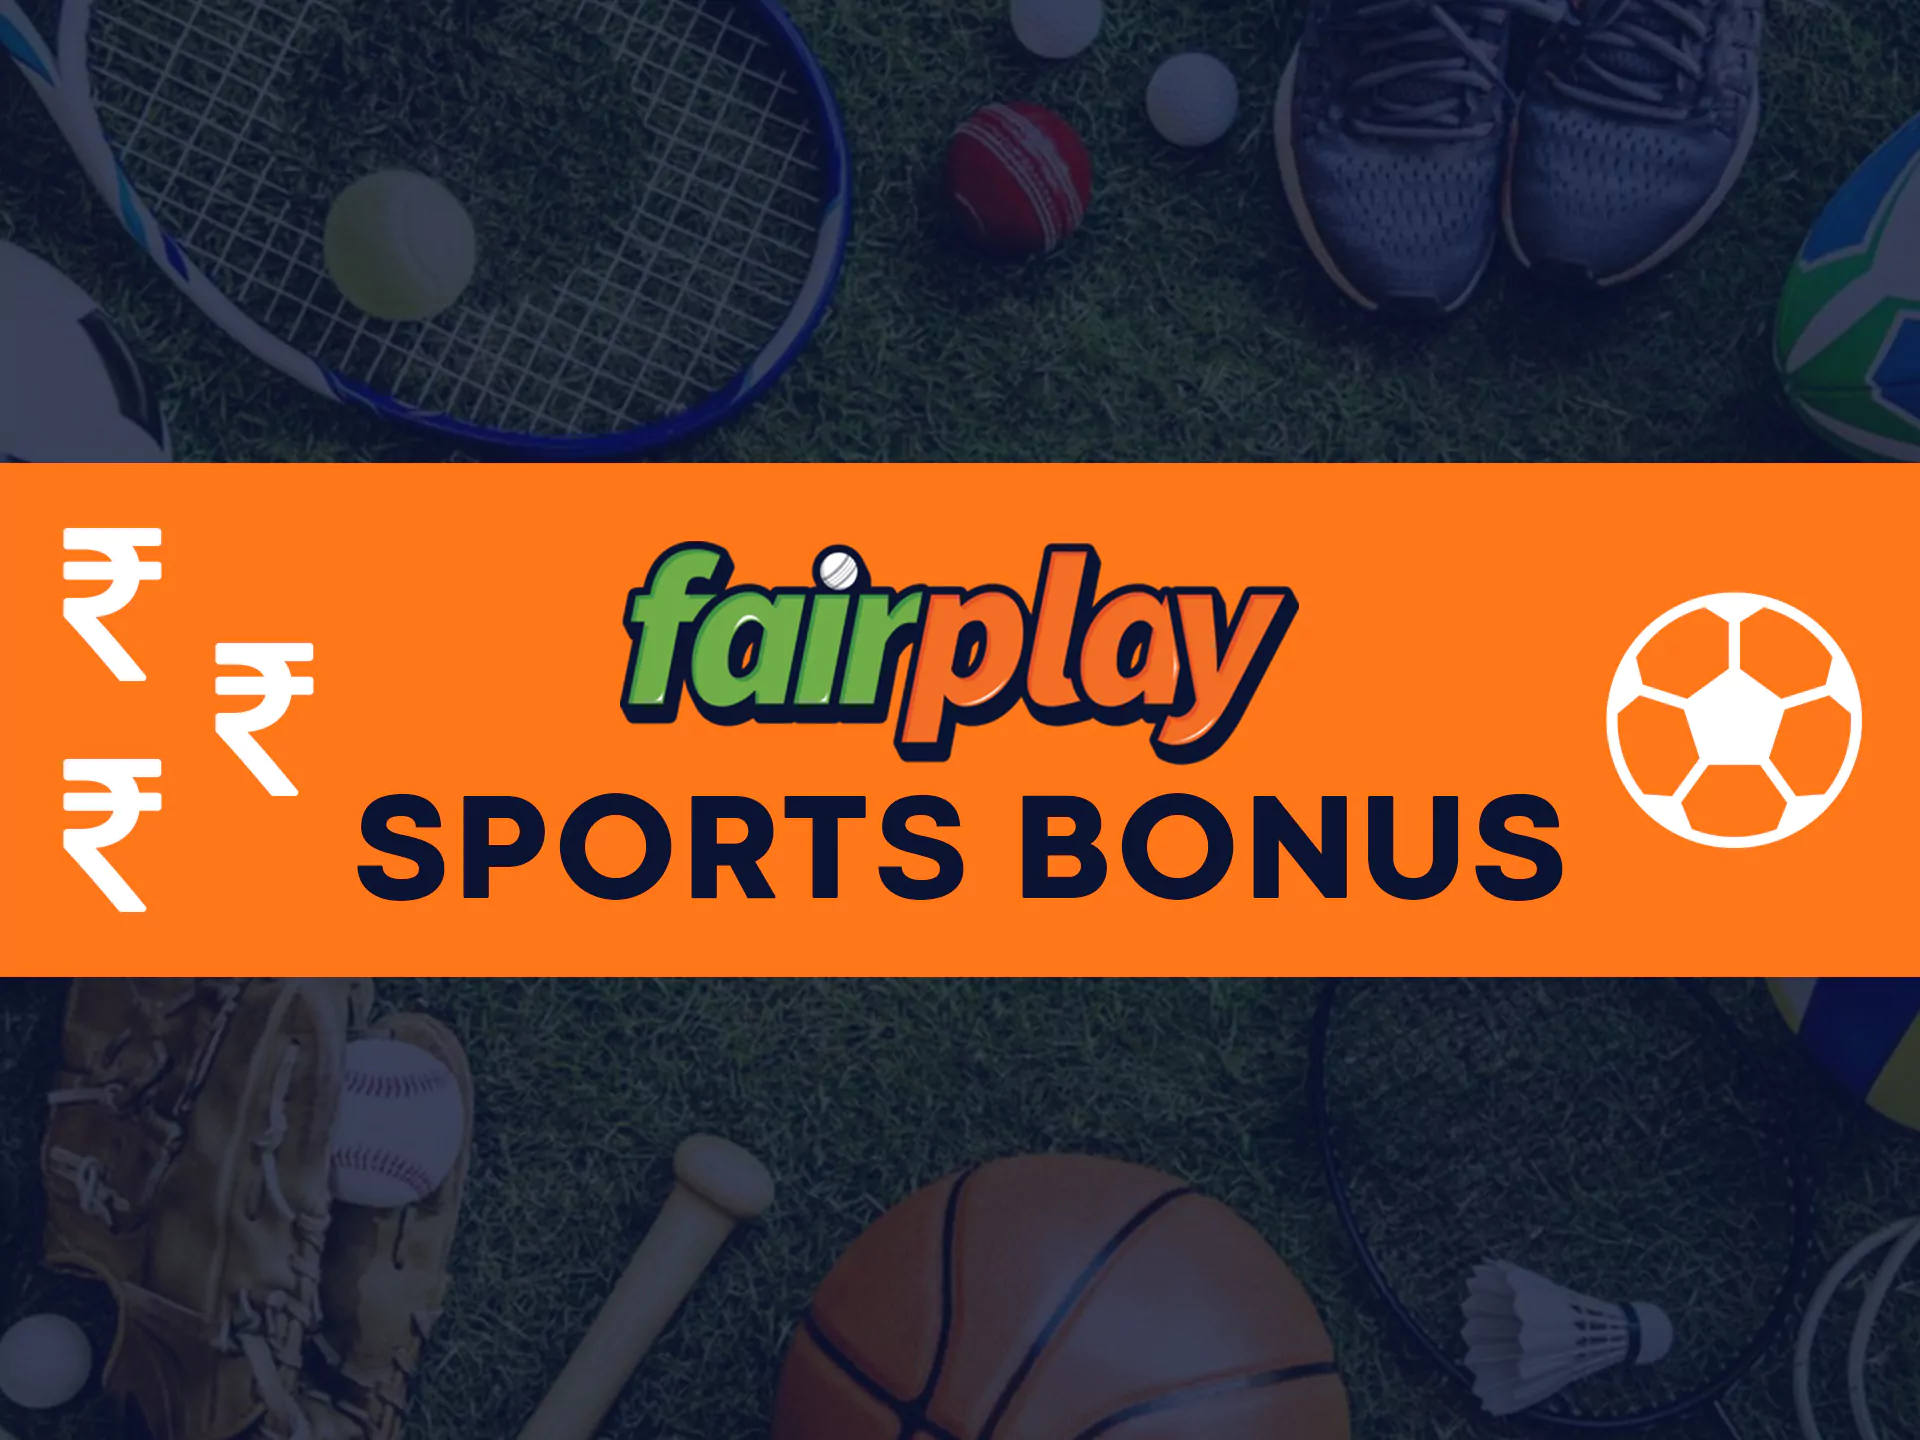 Get bonus at Farplay online for betting on sports.